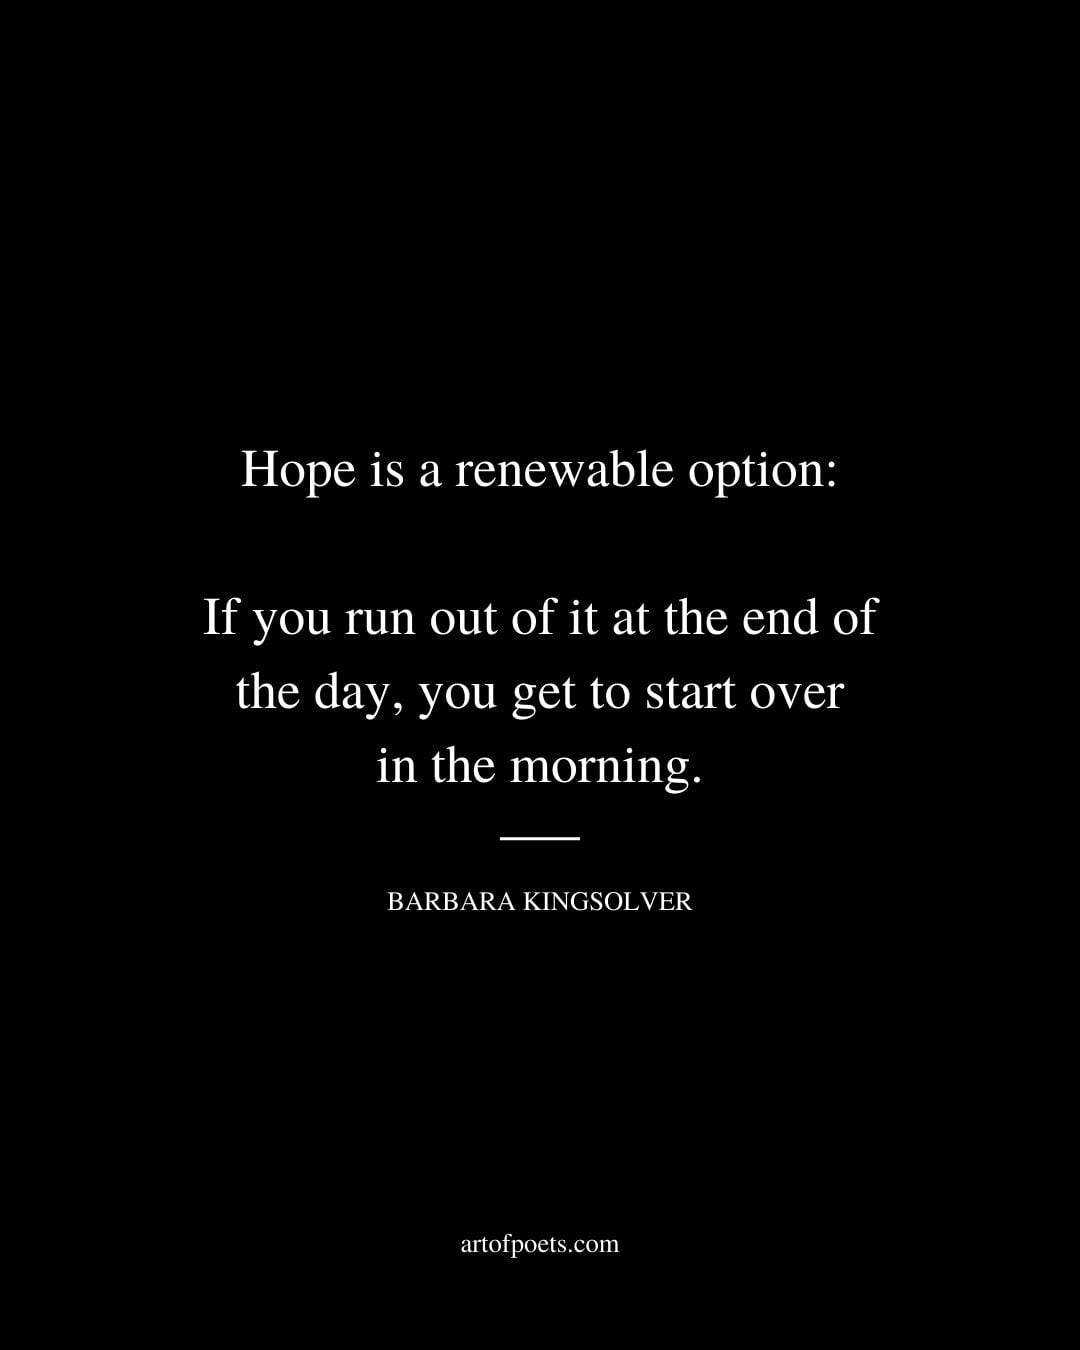 Hope is a renewable option If you run out of it at the end of the day you get to start over in the morning. Barbara Kingsolver